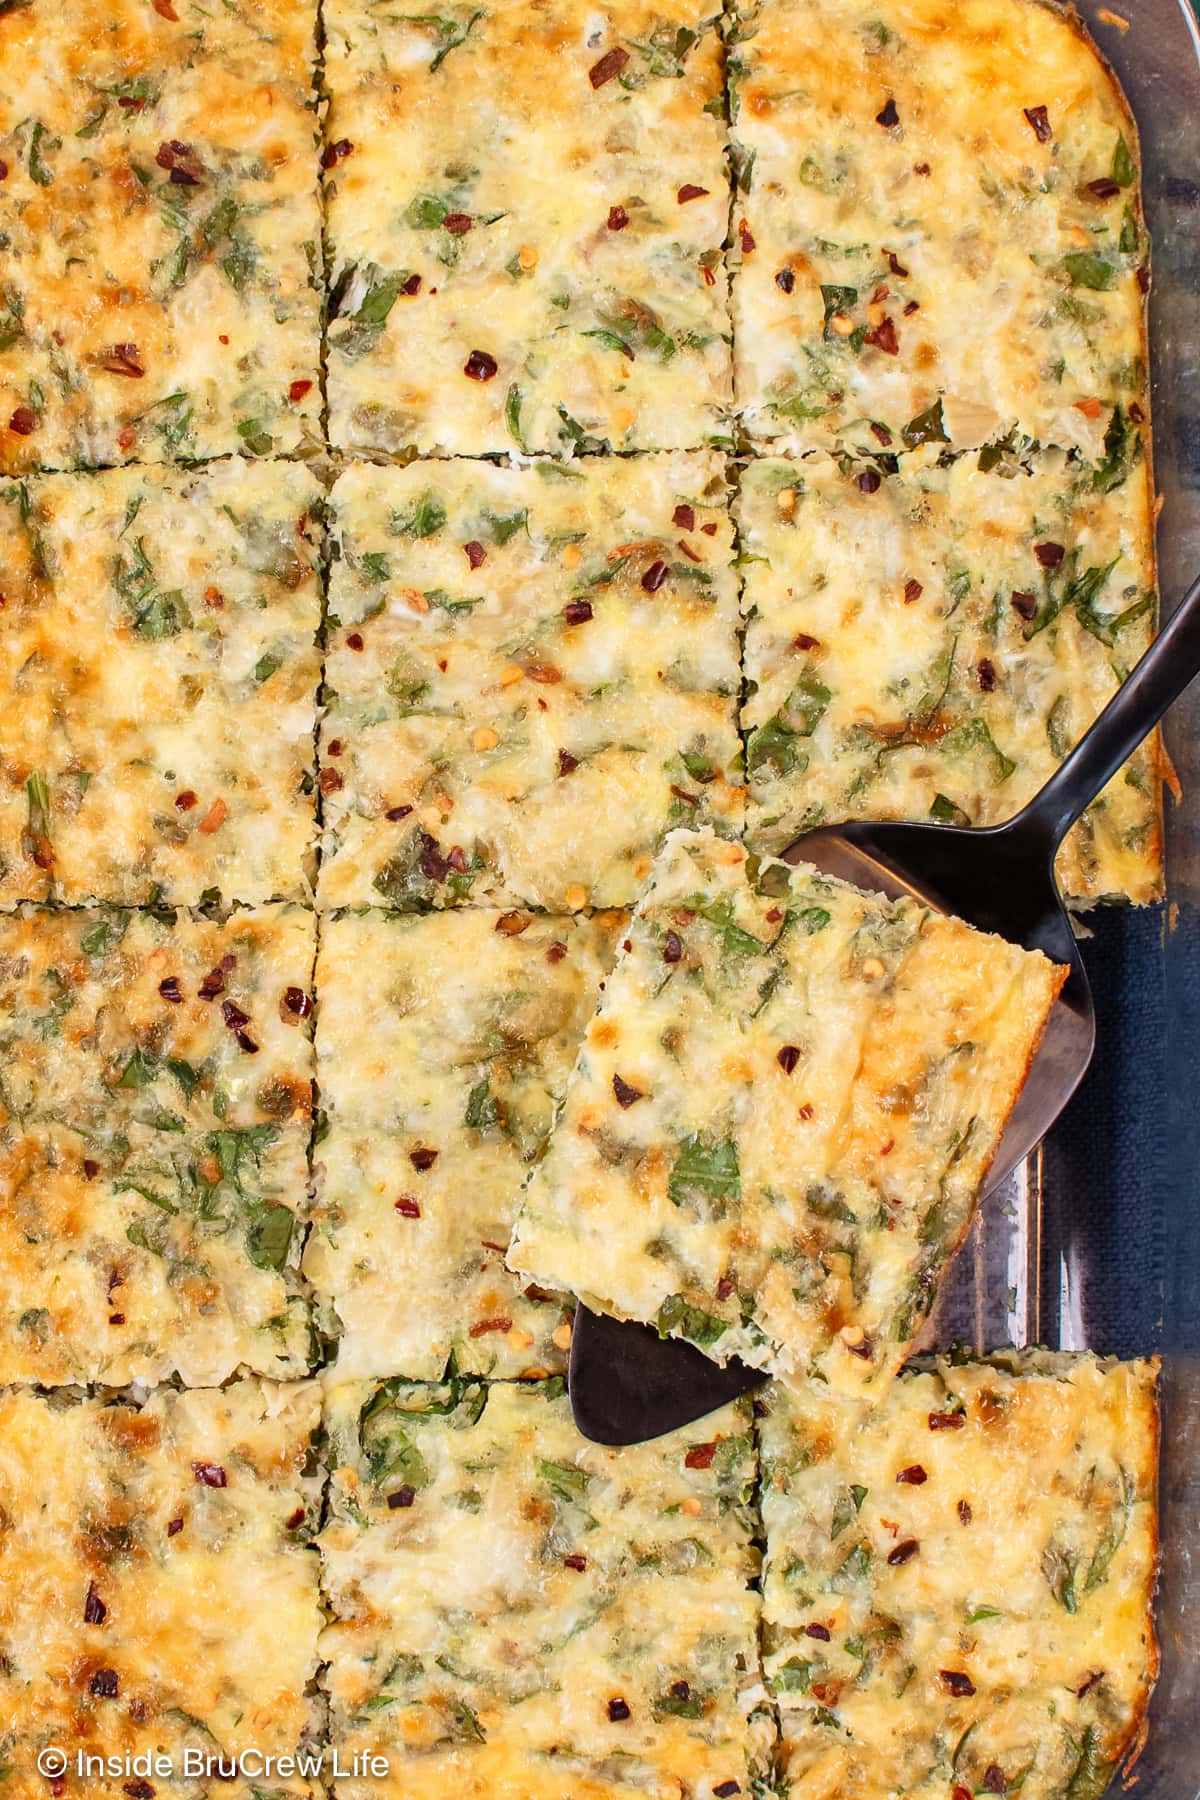 Squares of egg bake in a glass dish.